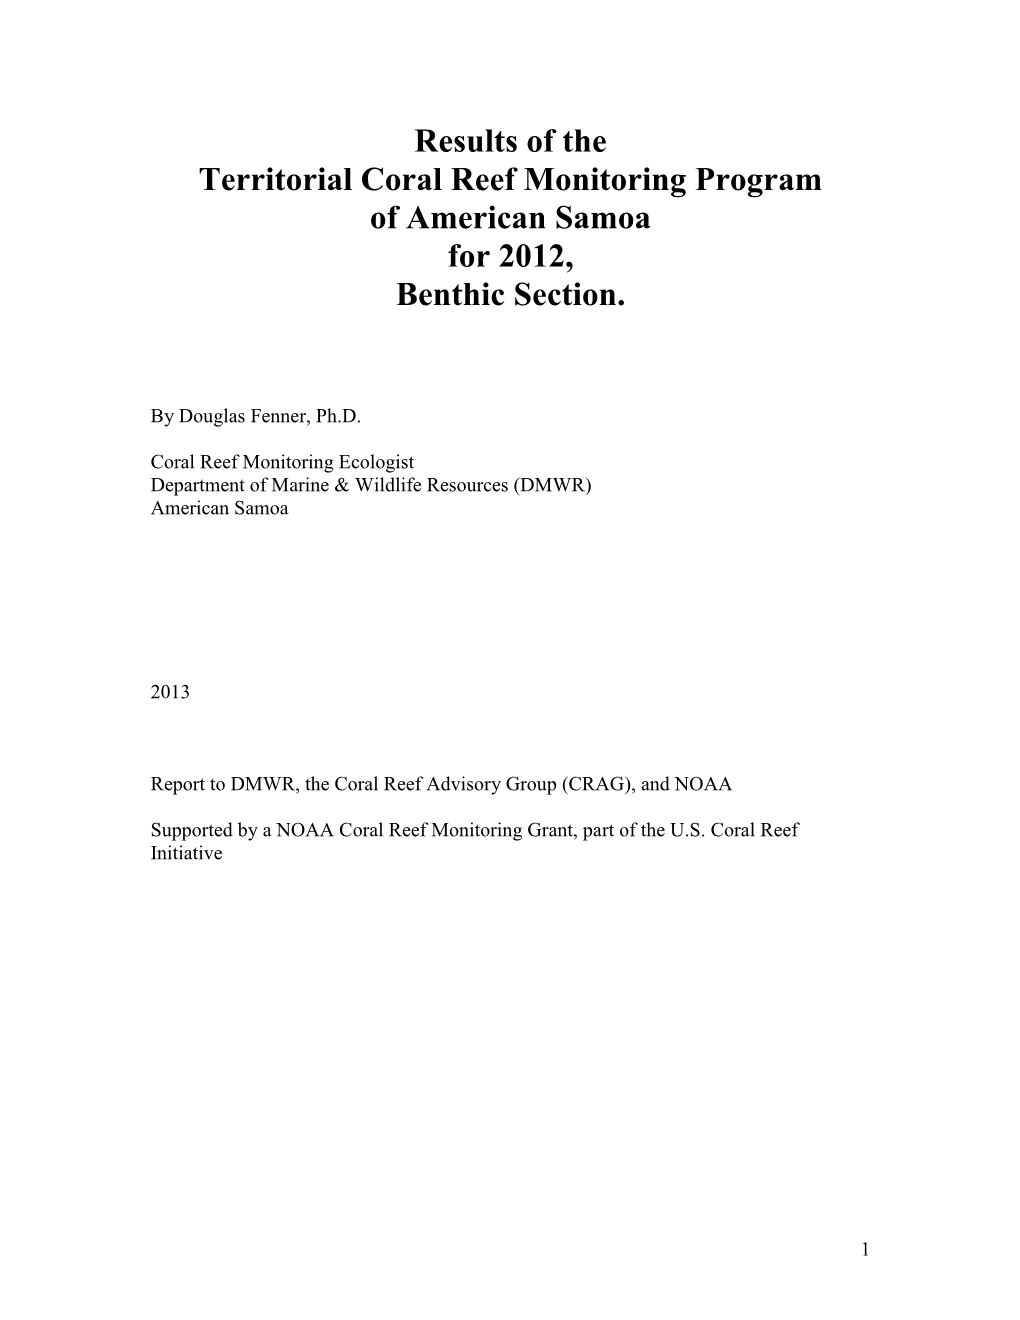 Results of the Territorial Coral Reef Monitoring Program of American Samoa for 2012, Benthic Section